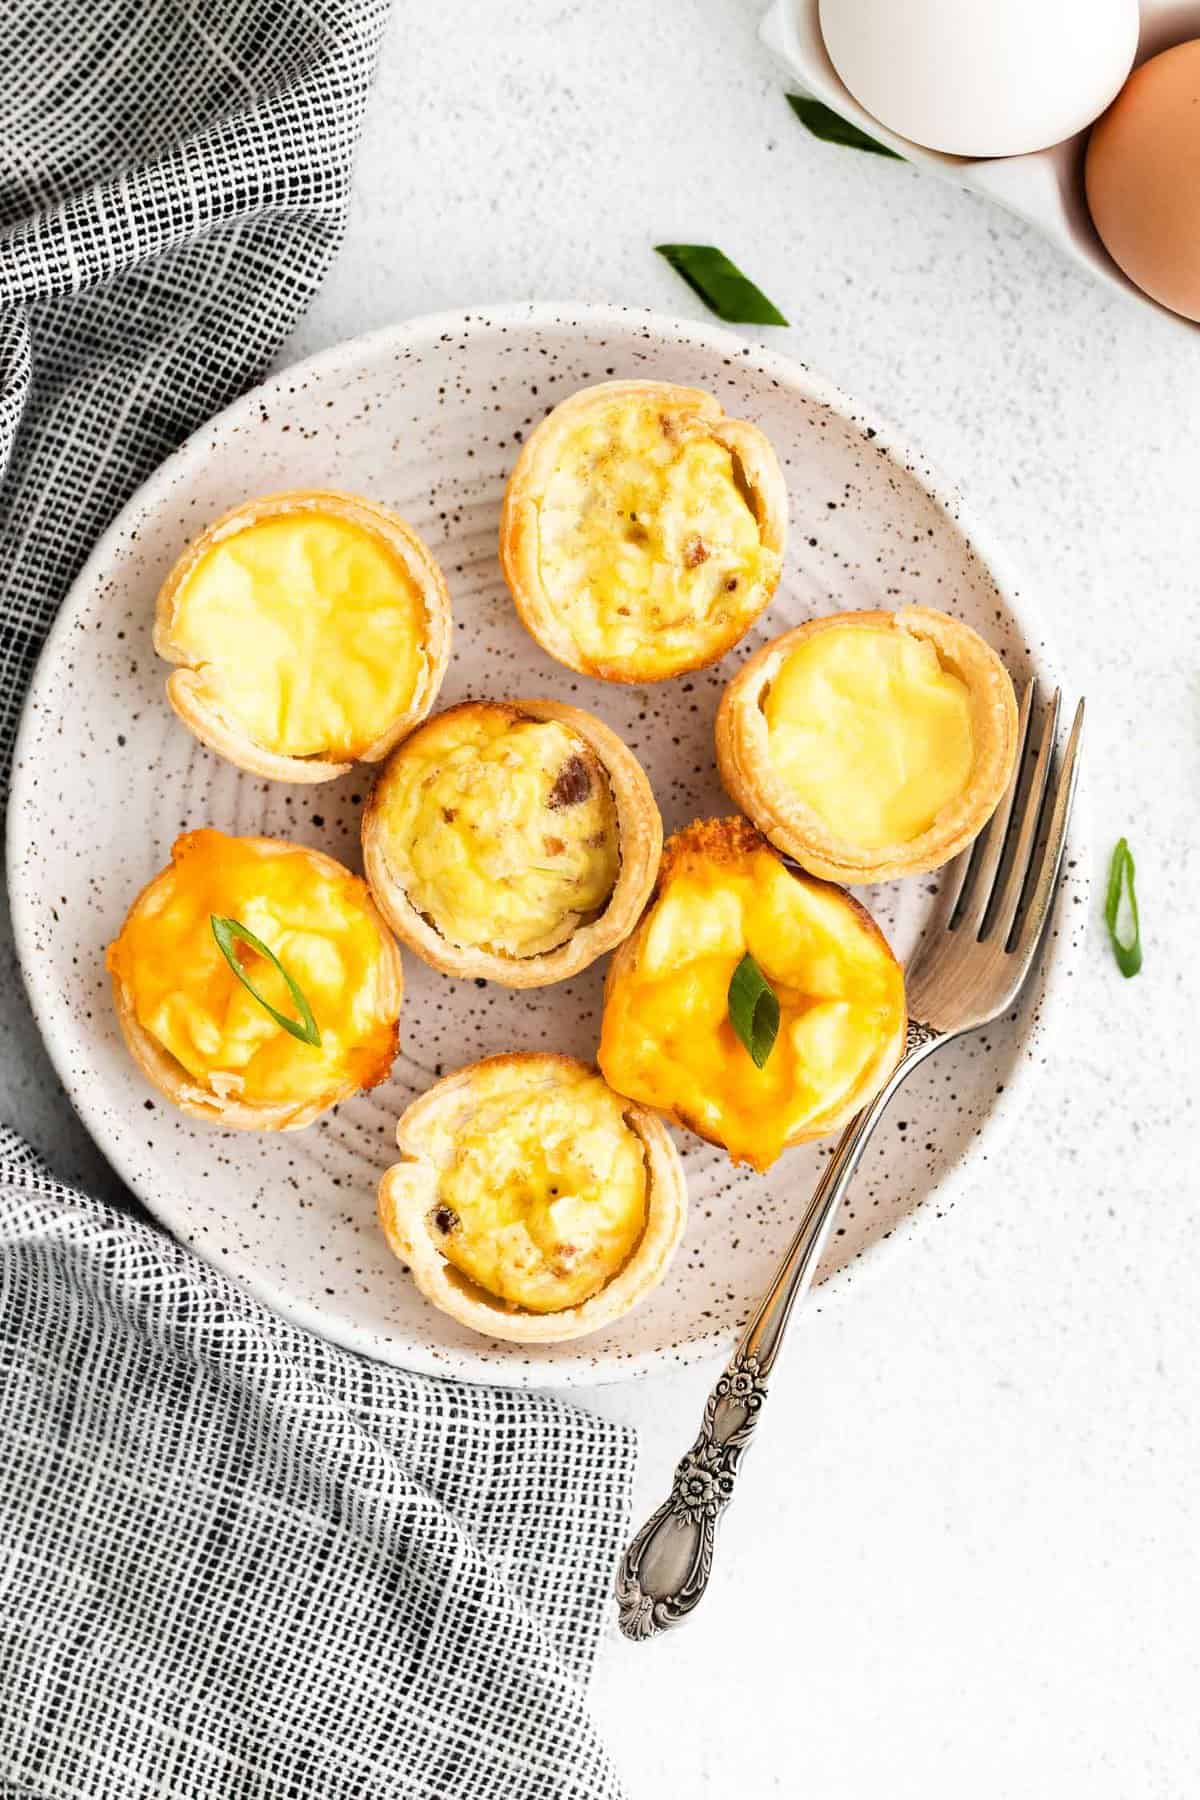 3 varieties of mini quiches on a small round plate.